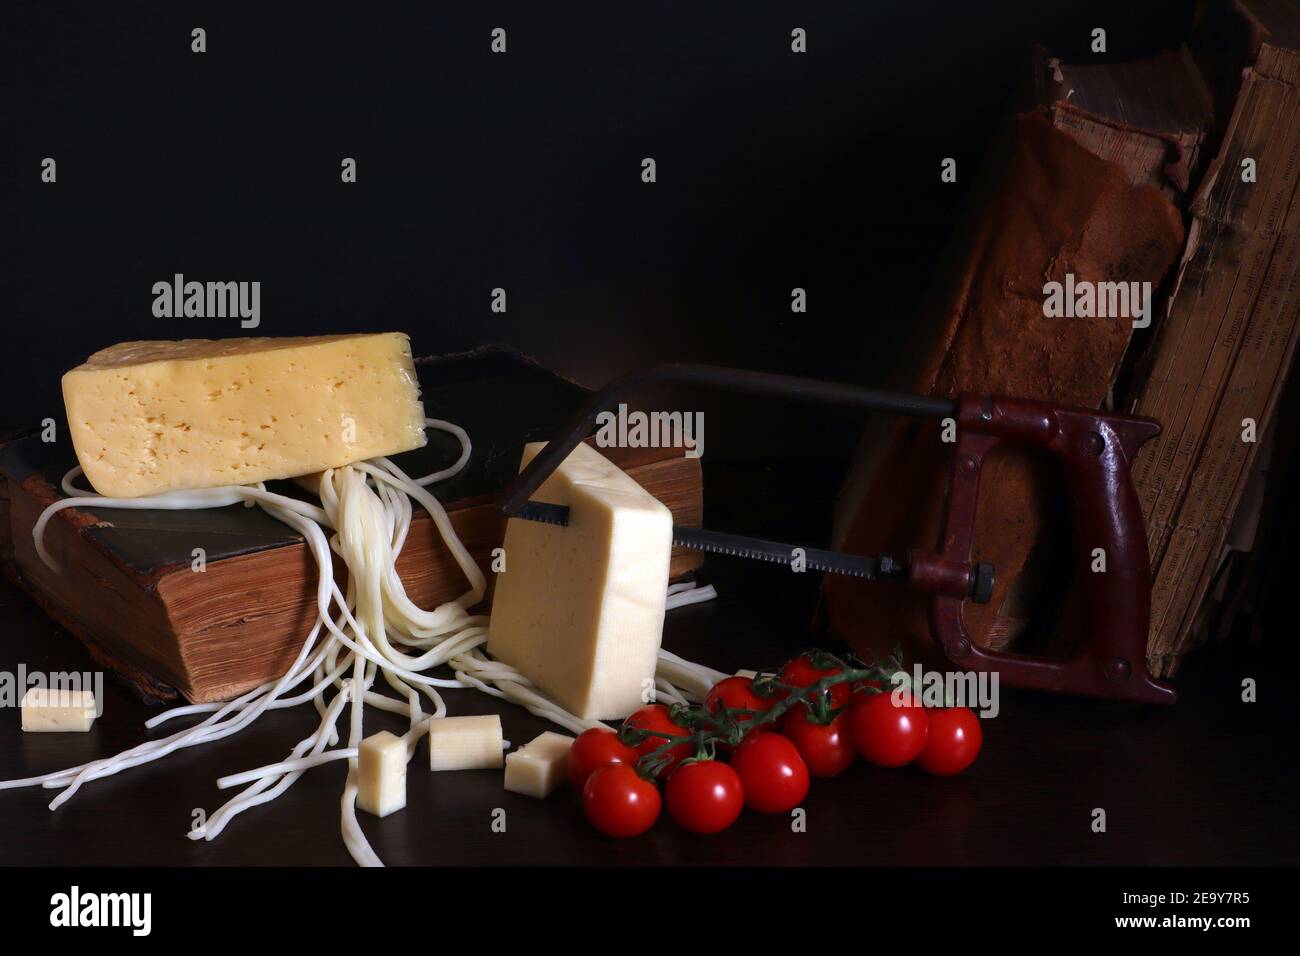 Still life with three cheeses, cherry tomatoes, old books and arm saw, absurd food photo Stock Photo